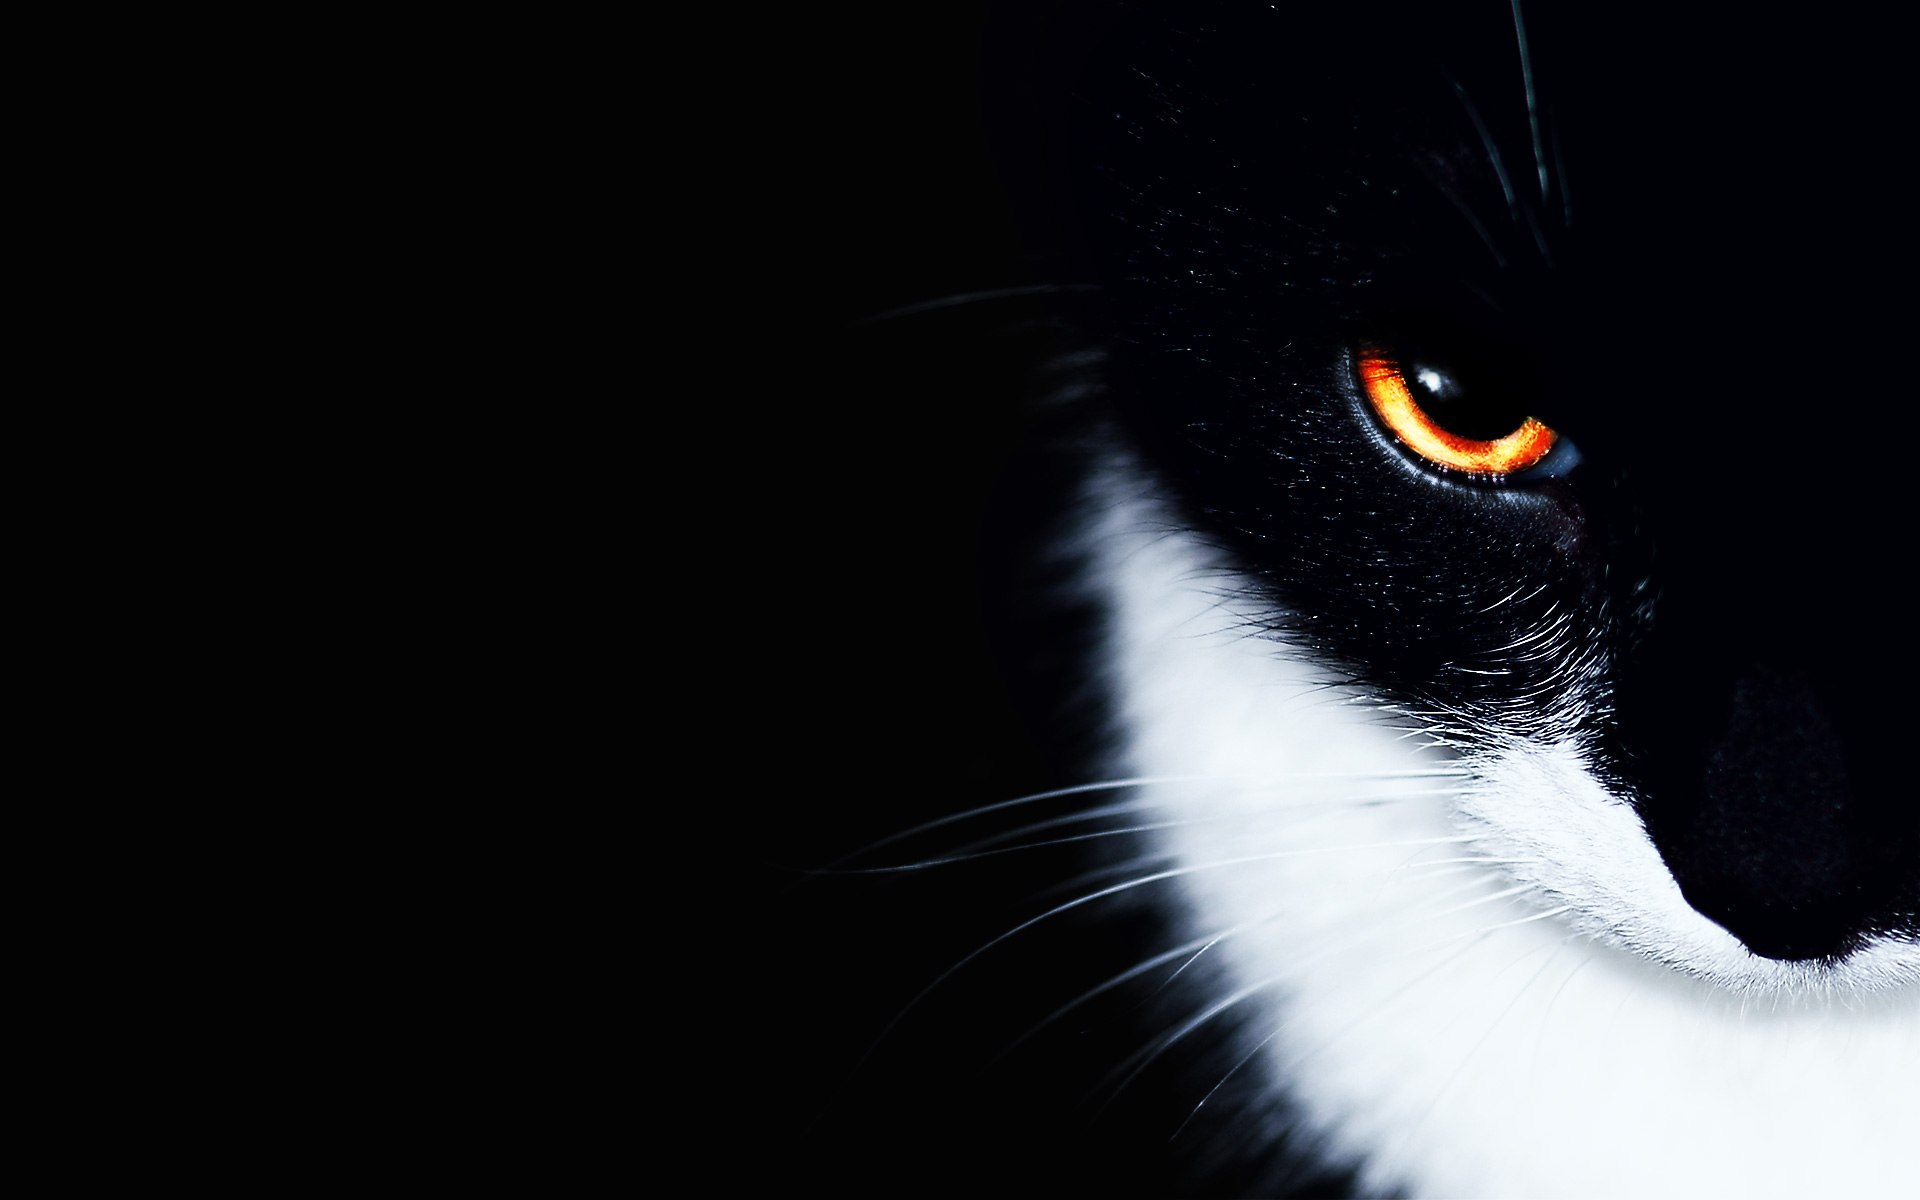 Beautiful Eye Cat Wallpaper Background With